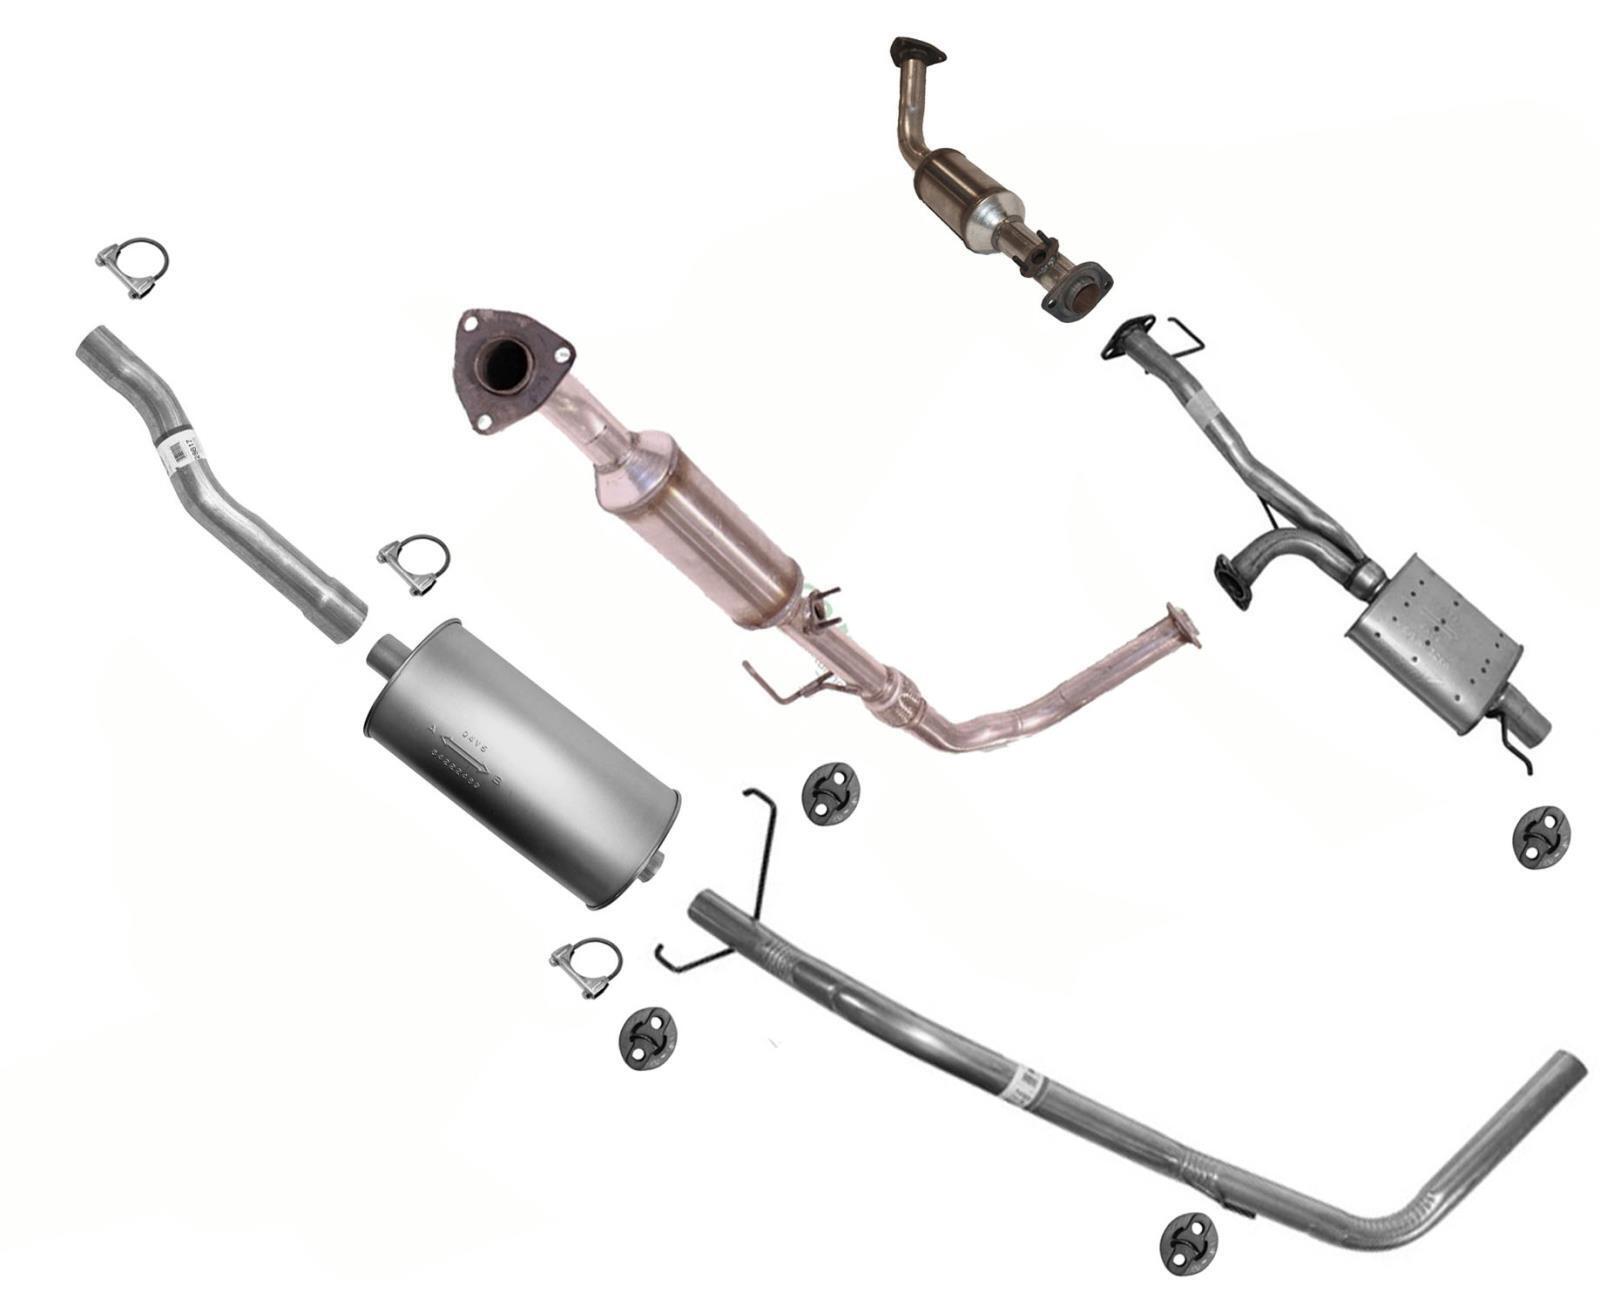 Exhaust System Fits Toyota Tundra 4.7L 2000-2002 with Federal Emission